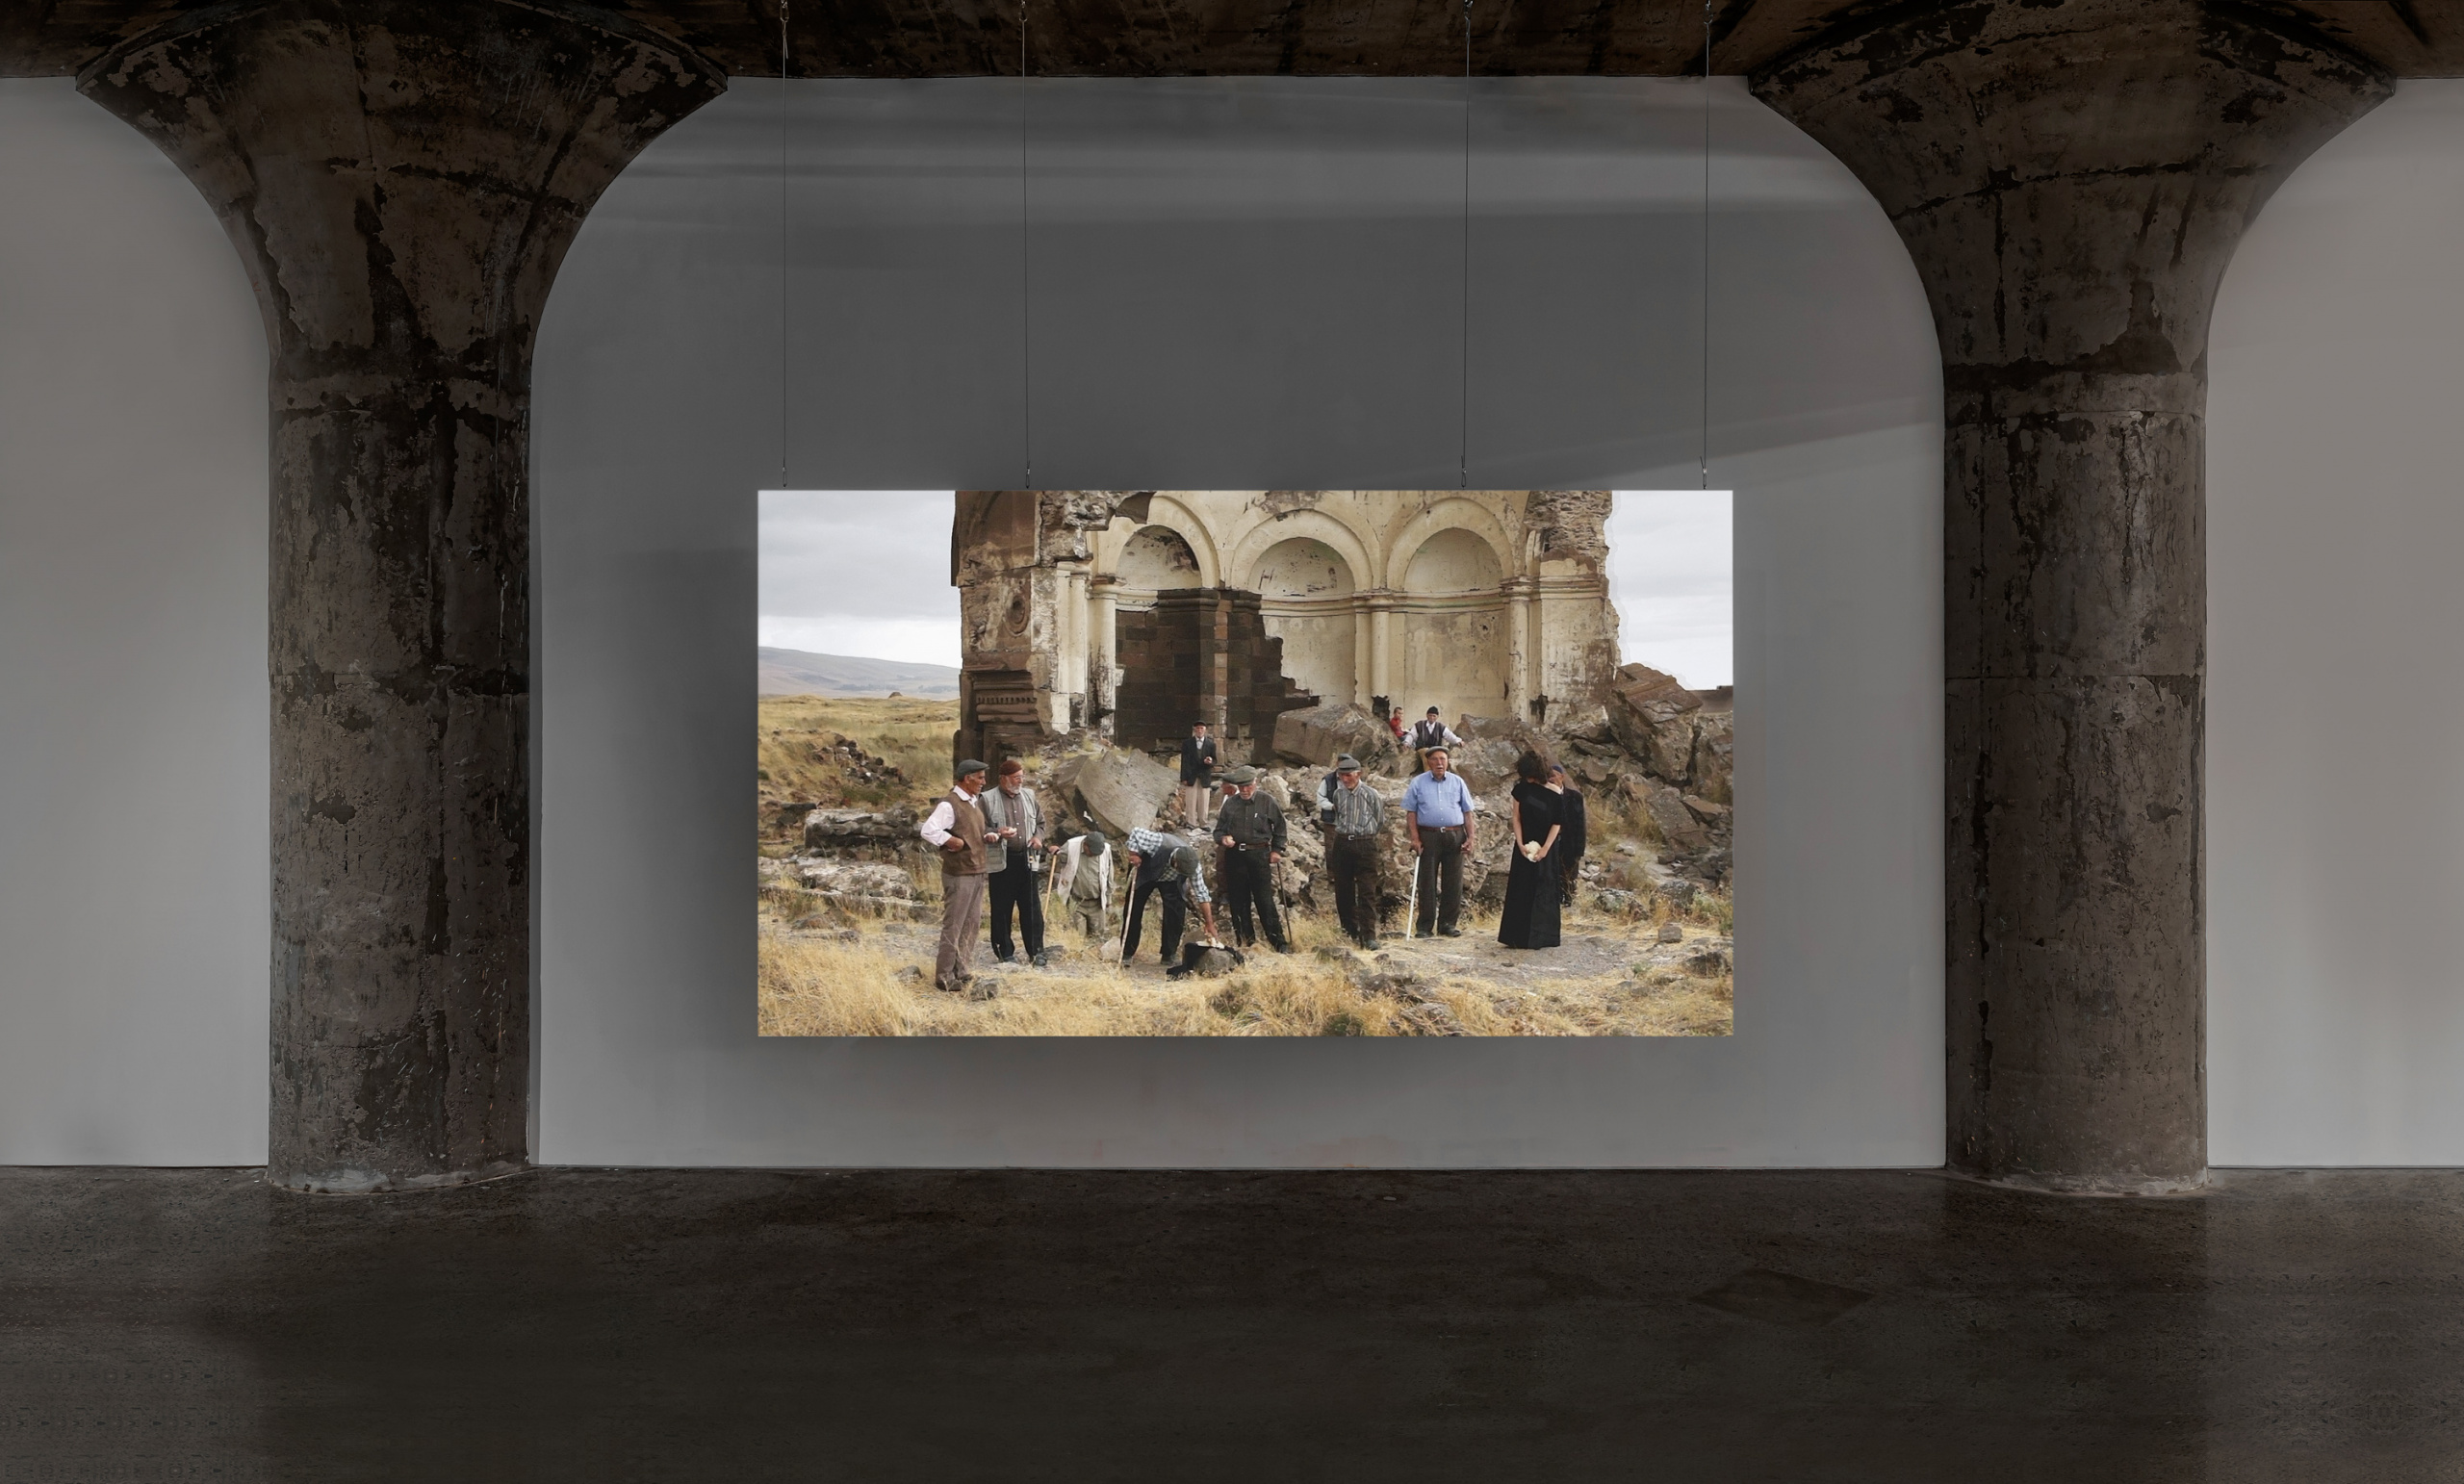 Fatma Bucak, Blessed are you who come, installation view, Museum of Contemporary Art Toronto, 2020–21. Courtesy of the artist and MOCA. Photo: Toni Hafkenscheid